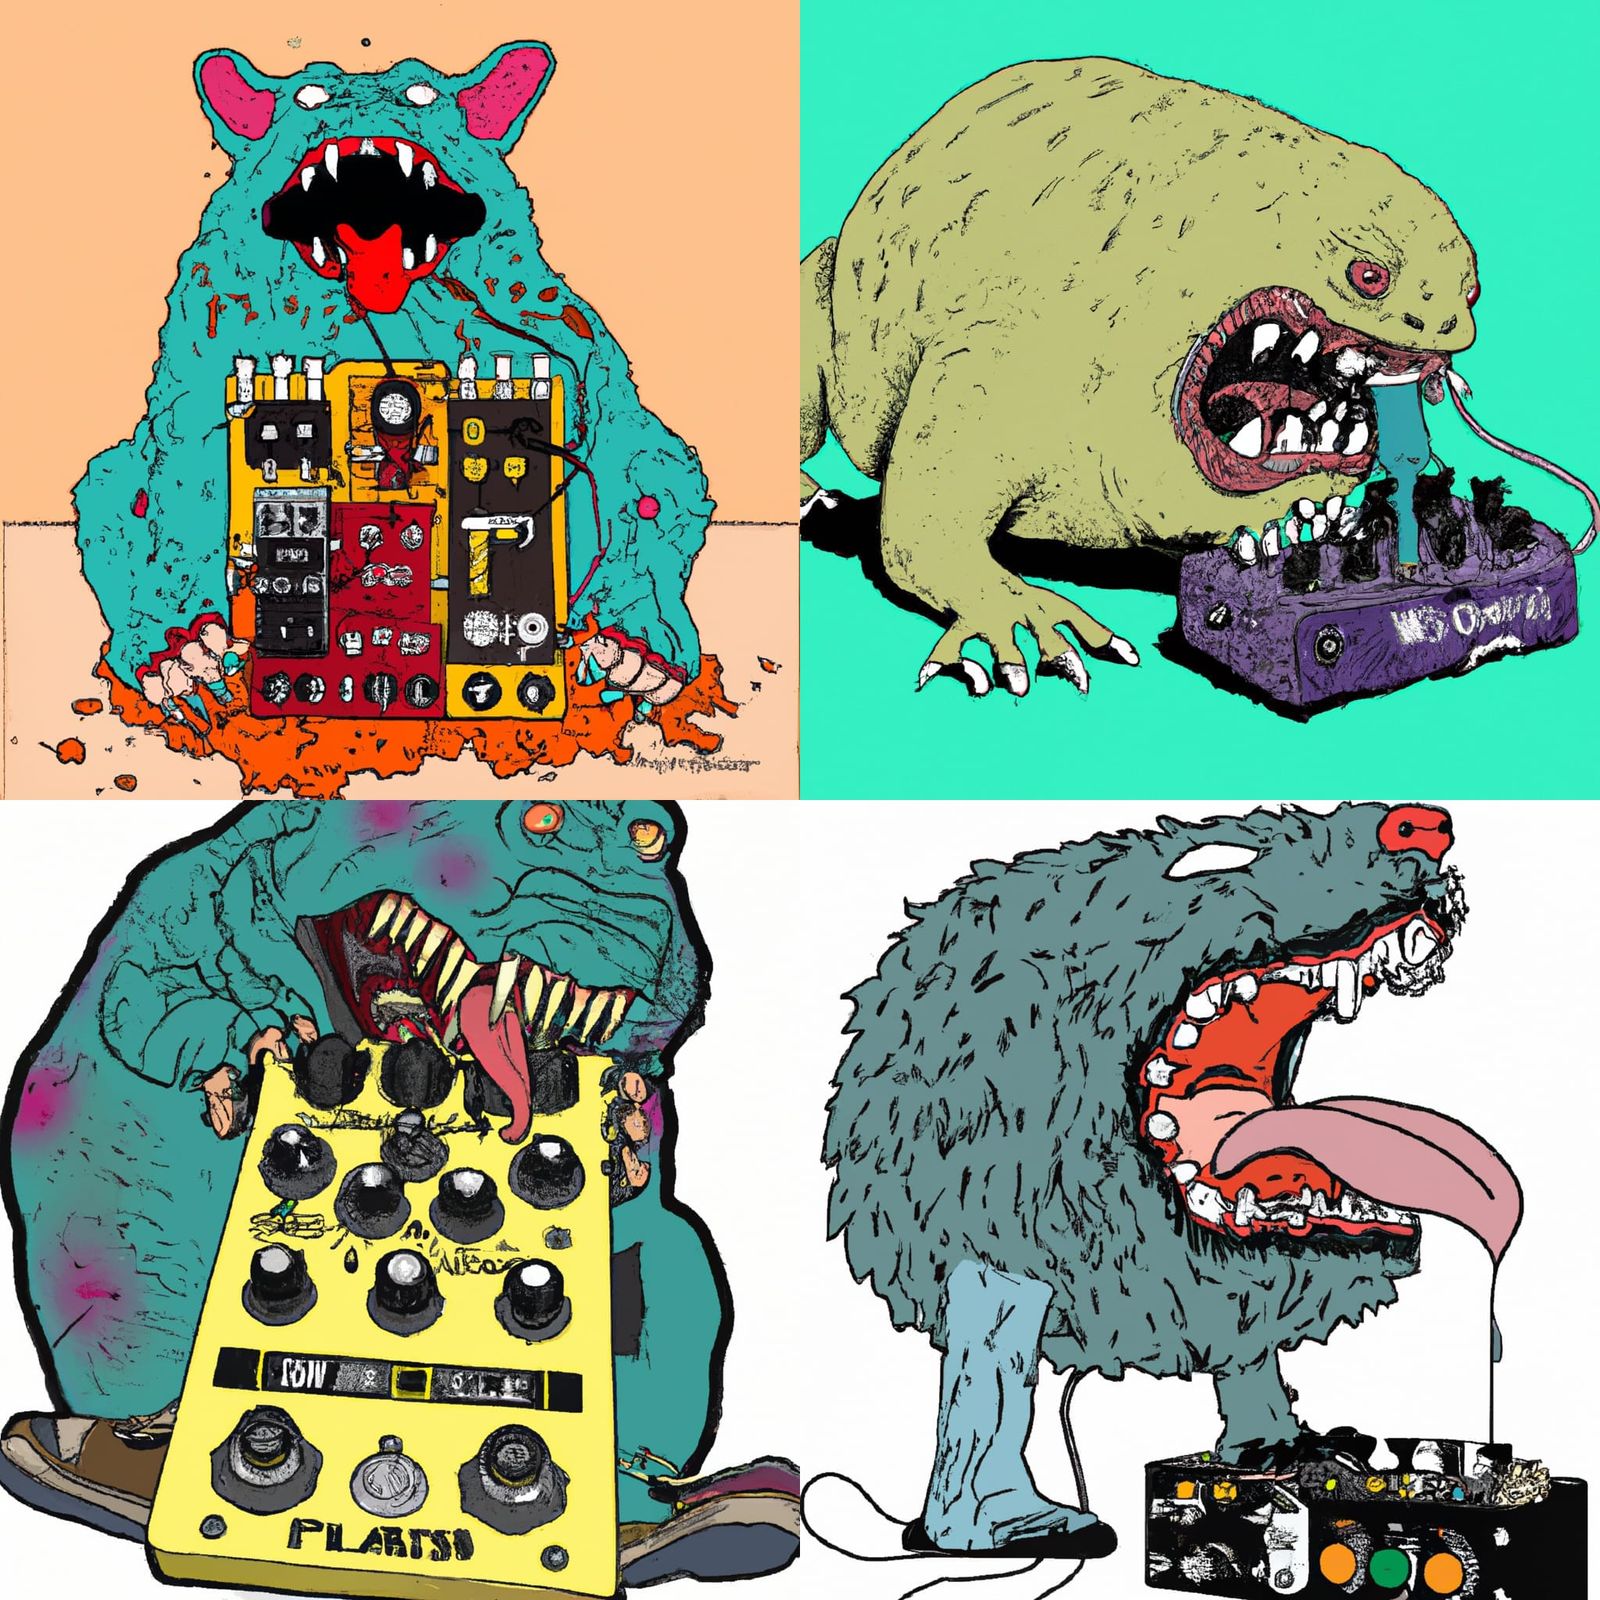 A big yucky monster eating guitar pedals